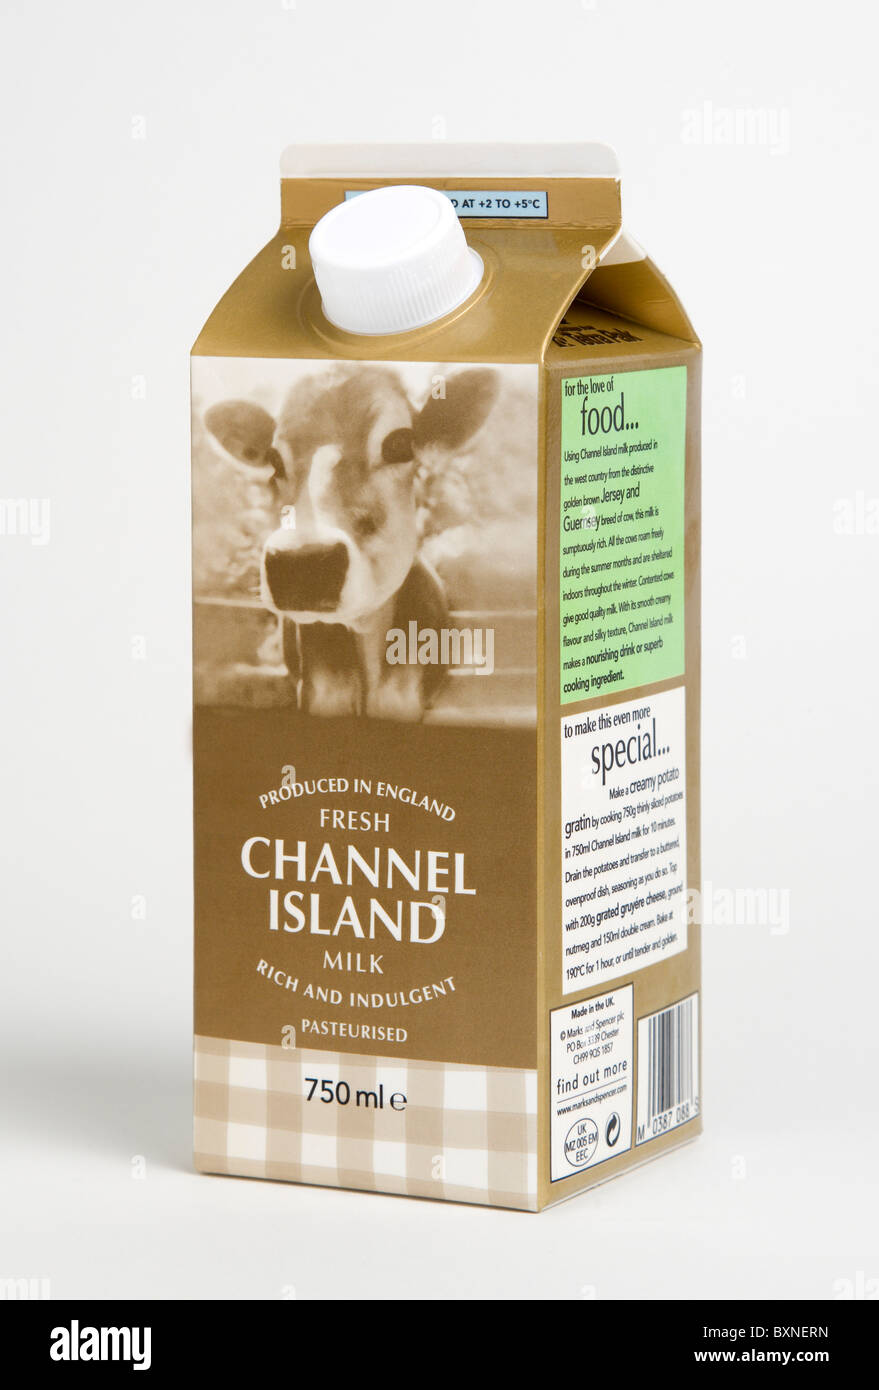 Drink, Milk, Pasteurised, Full Cream Fresh dairy milk Carton Produced in  England from the Channel Islands Stock Photo - Alamy